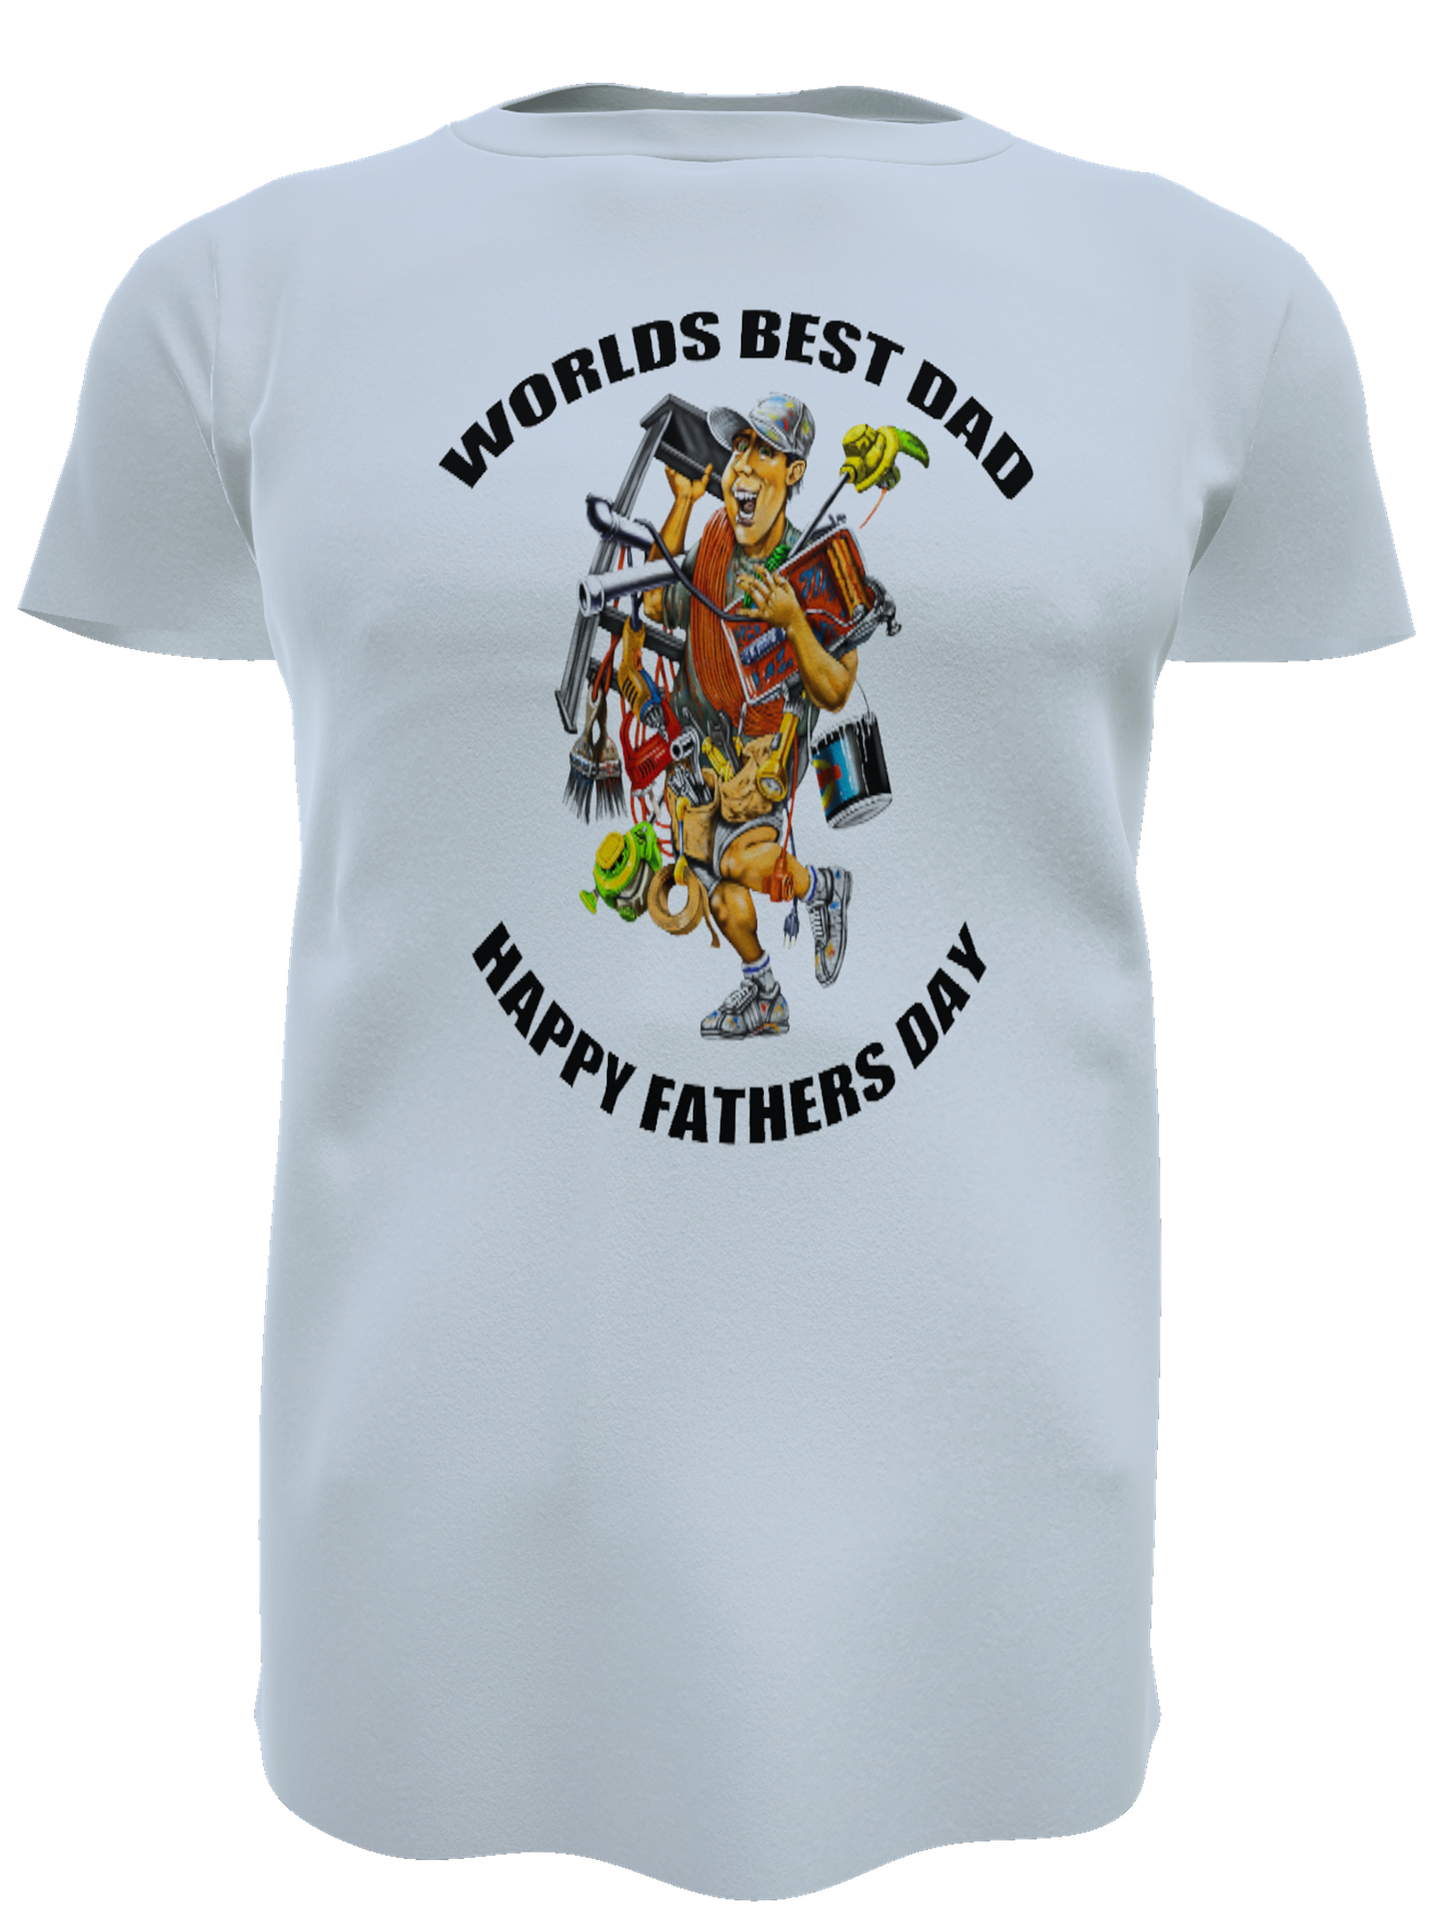 Fathers Day T-Shirt Size from S to 5XL